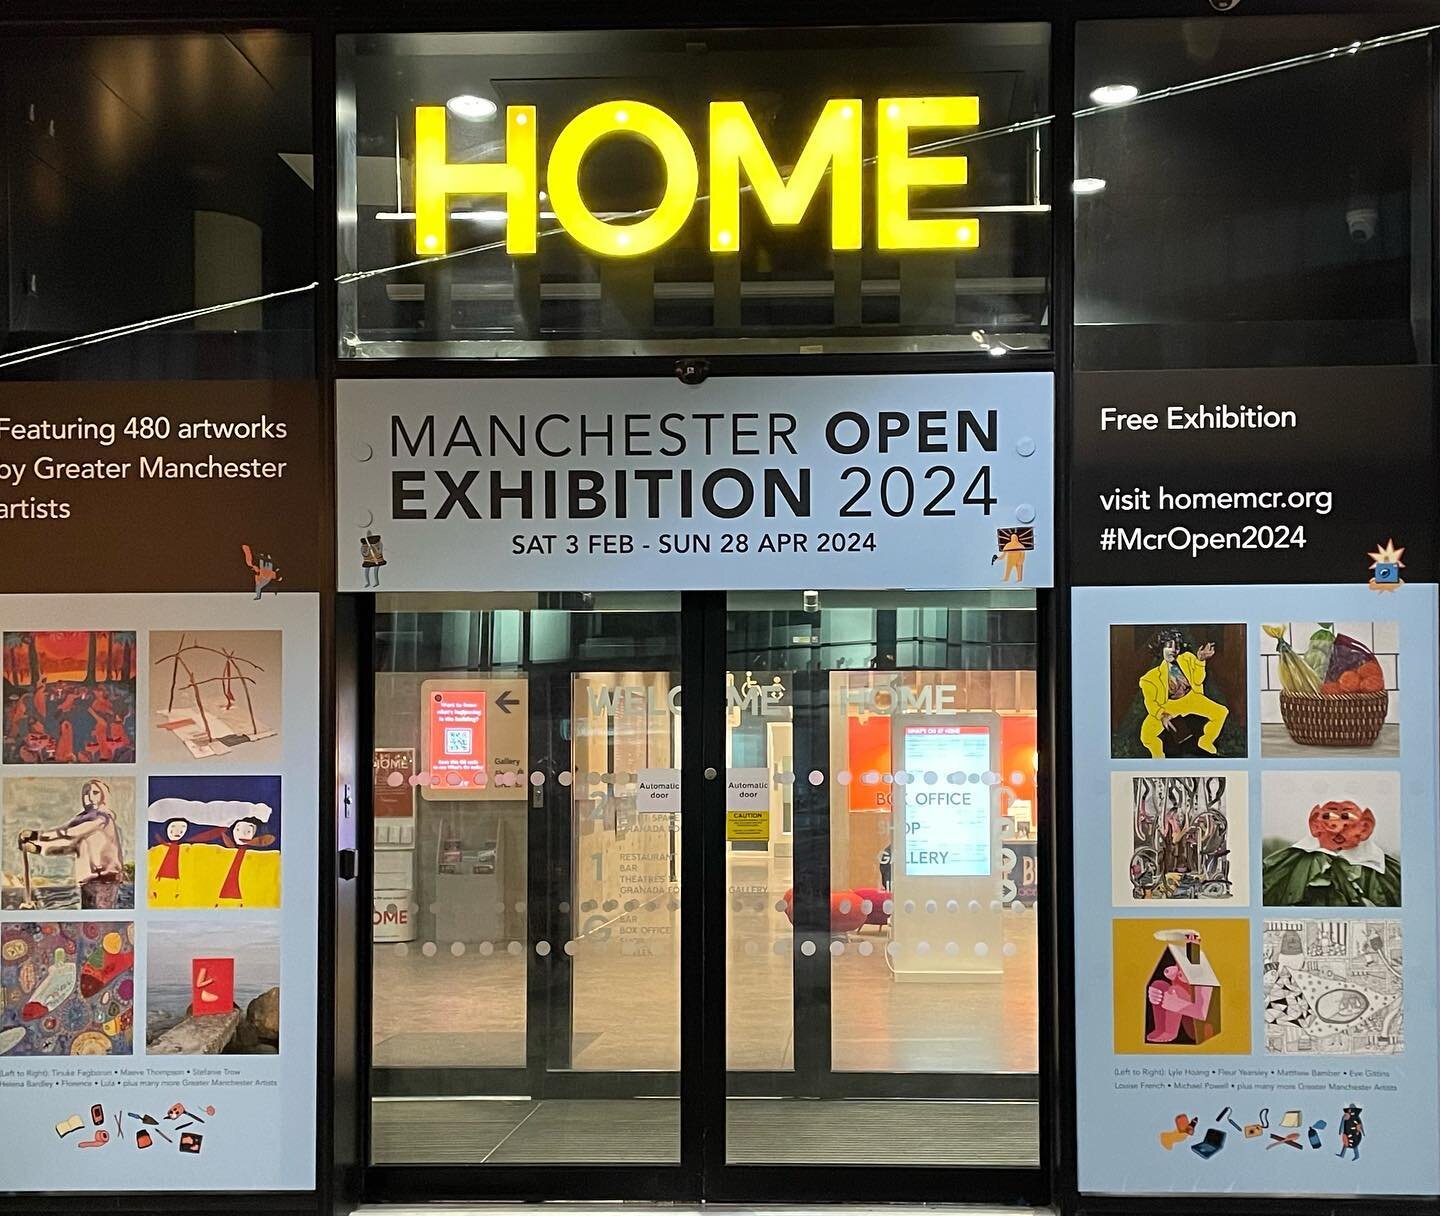 Just dropped off &lsquo;Ledger&rsquo; @homemcr for the upcoming #homeopen2024 which runs from February 3 - April 28 looking forward to seeing the work of fellow #manchesterevent #openexhibition #contemporaryart #manchesterartists #selectedexhibition 